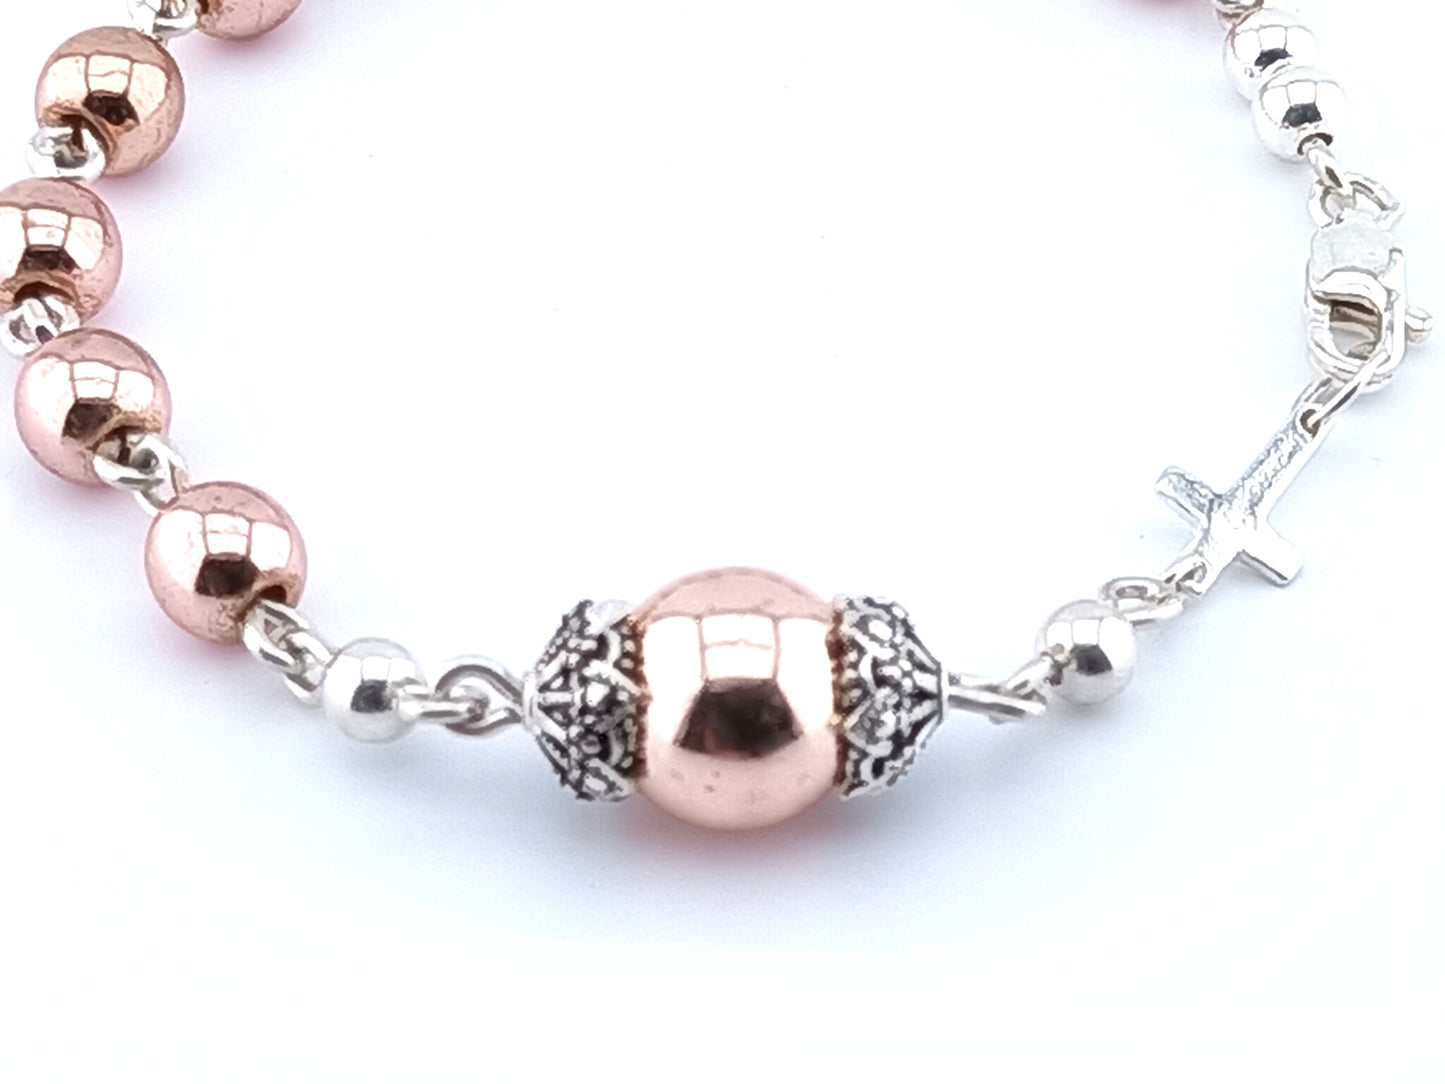 Rose Gold unique rosary beads single decade rosary bracelet in 925 solid sterling silver with rose gold plated beads.